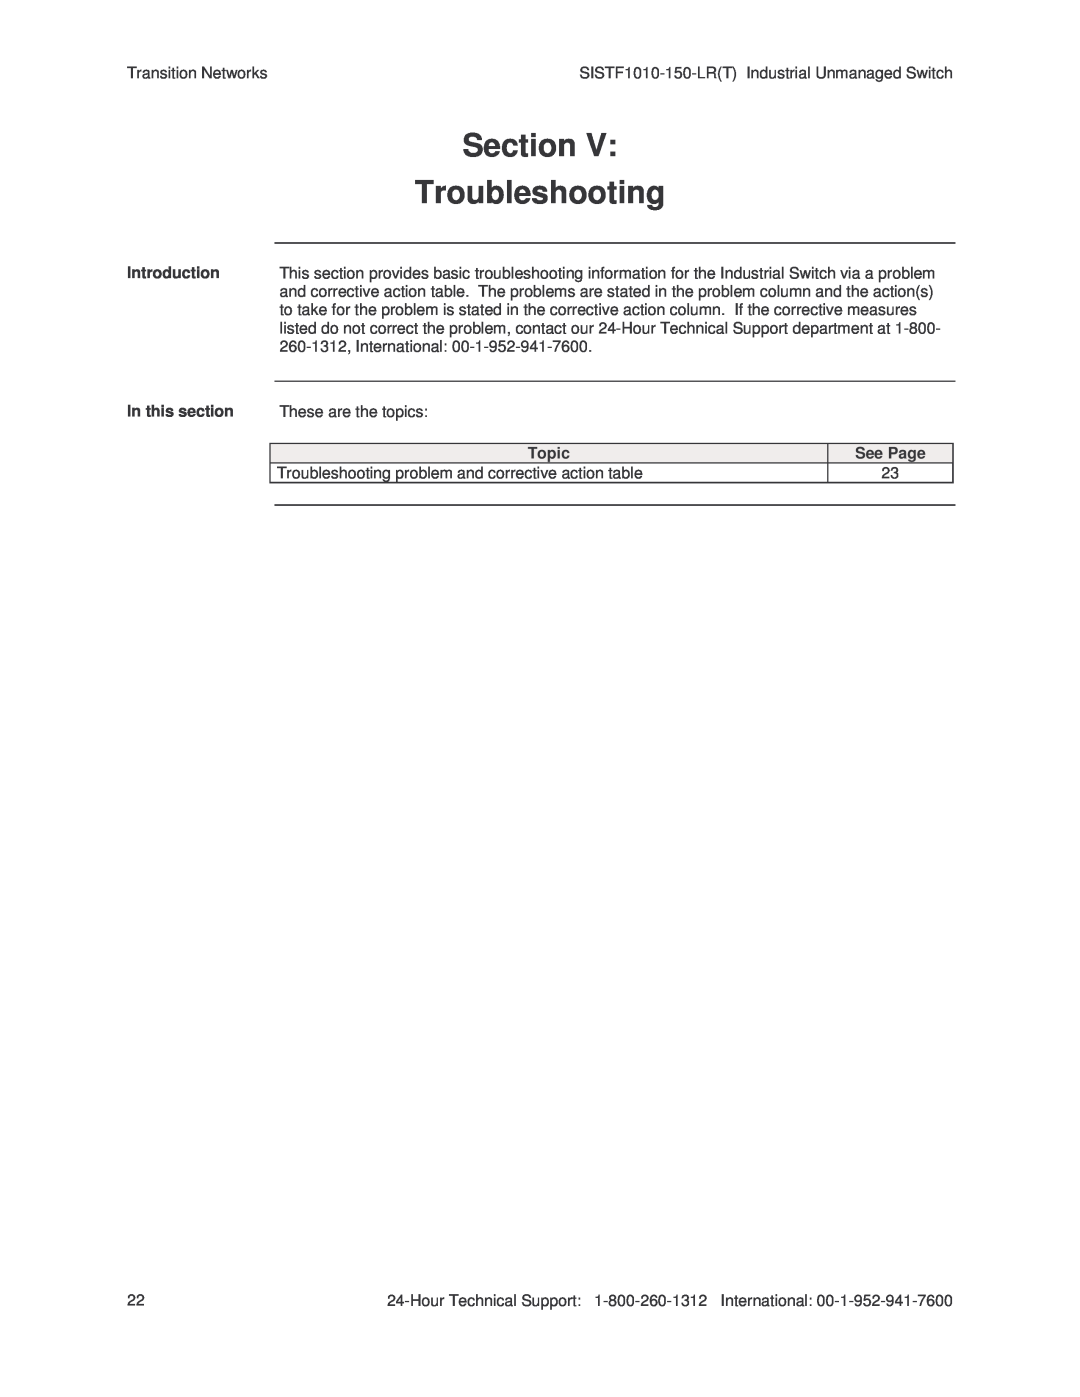 Transition Networks SISTF1010-150-LR(T) installation manual Section, Troubleshooting, These are the topics 